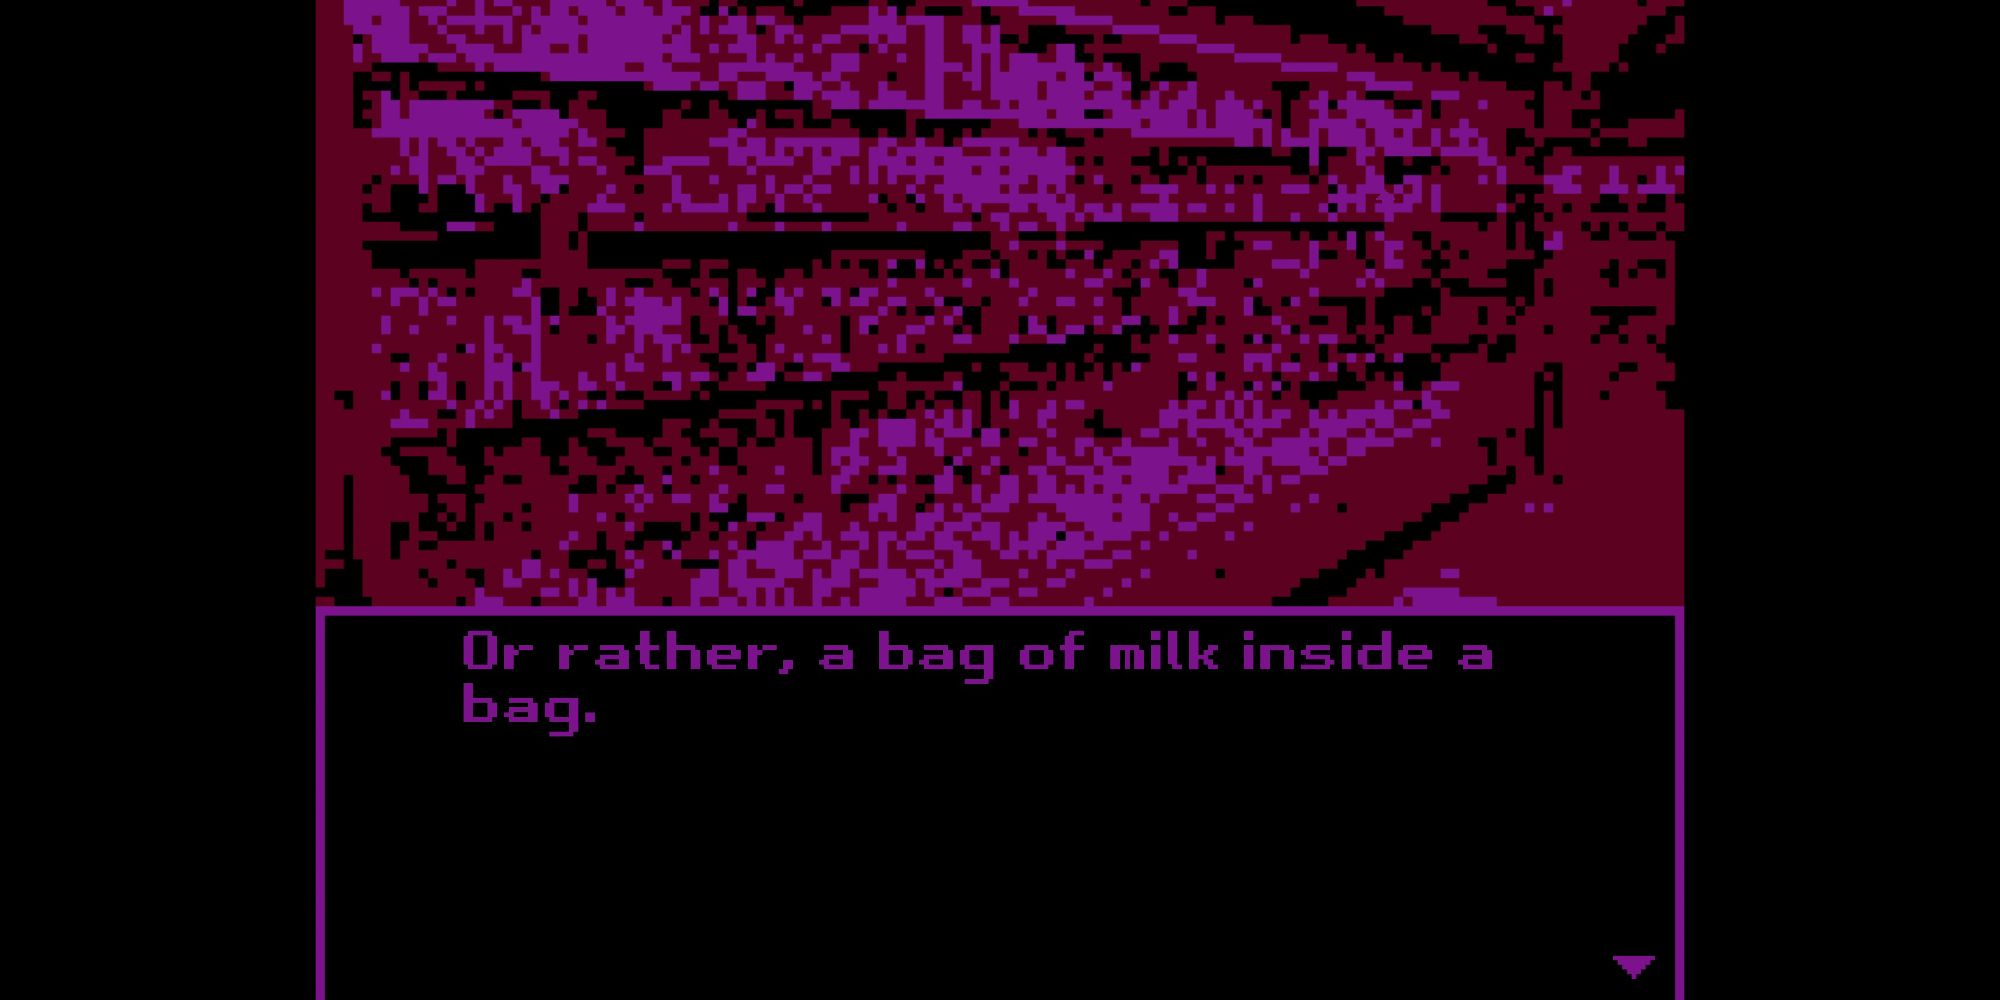 The protagonist comments on the bagged milk in the store.